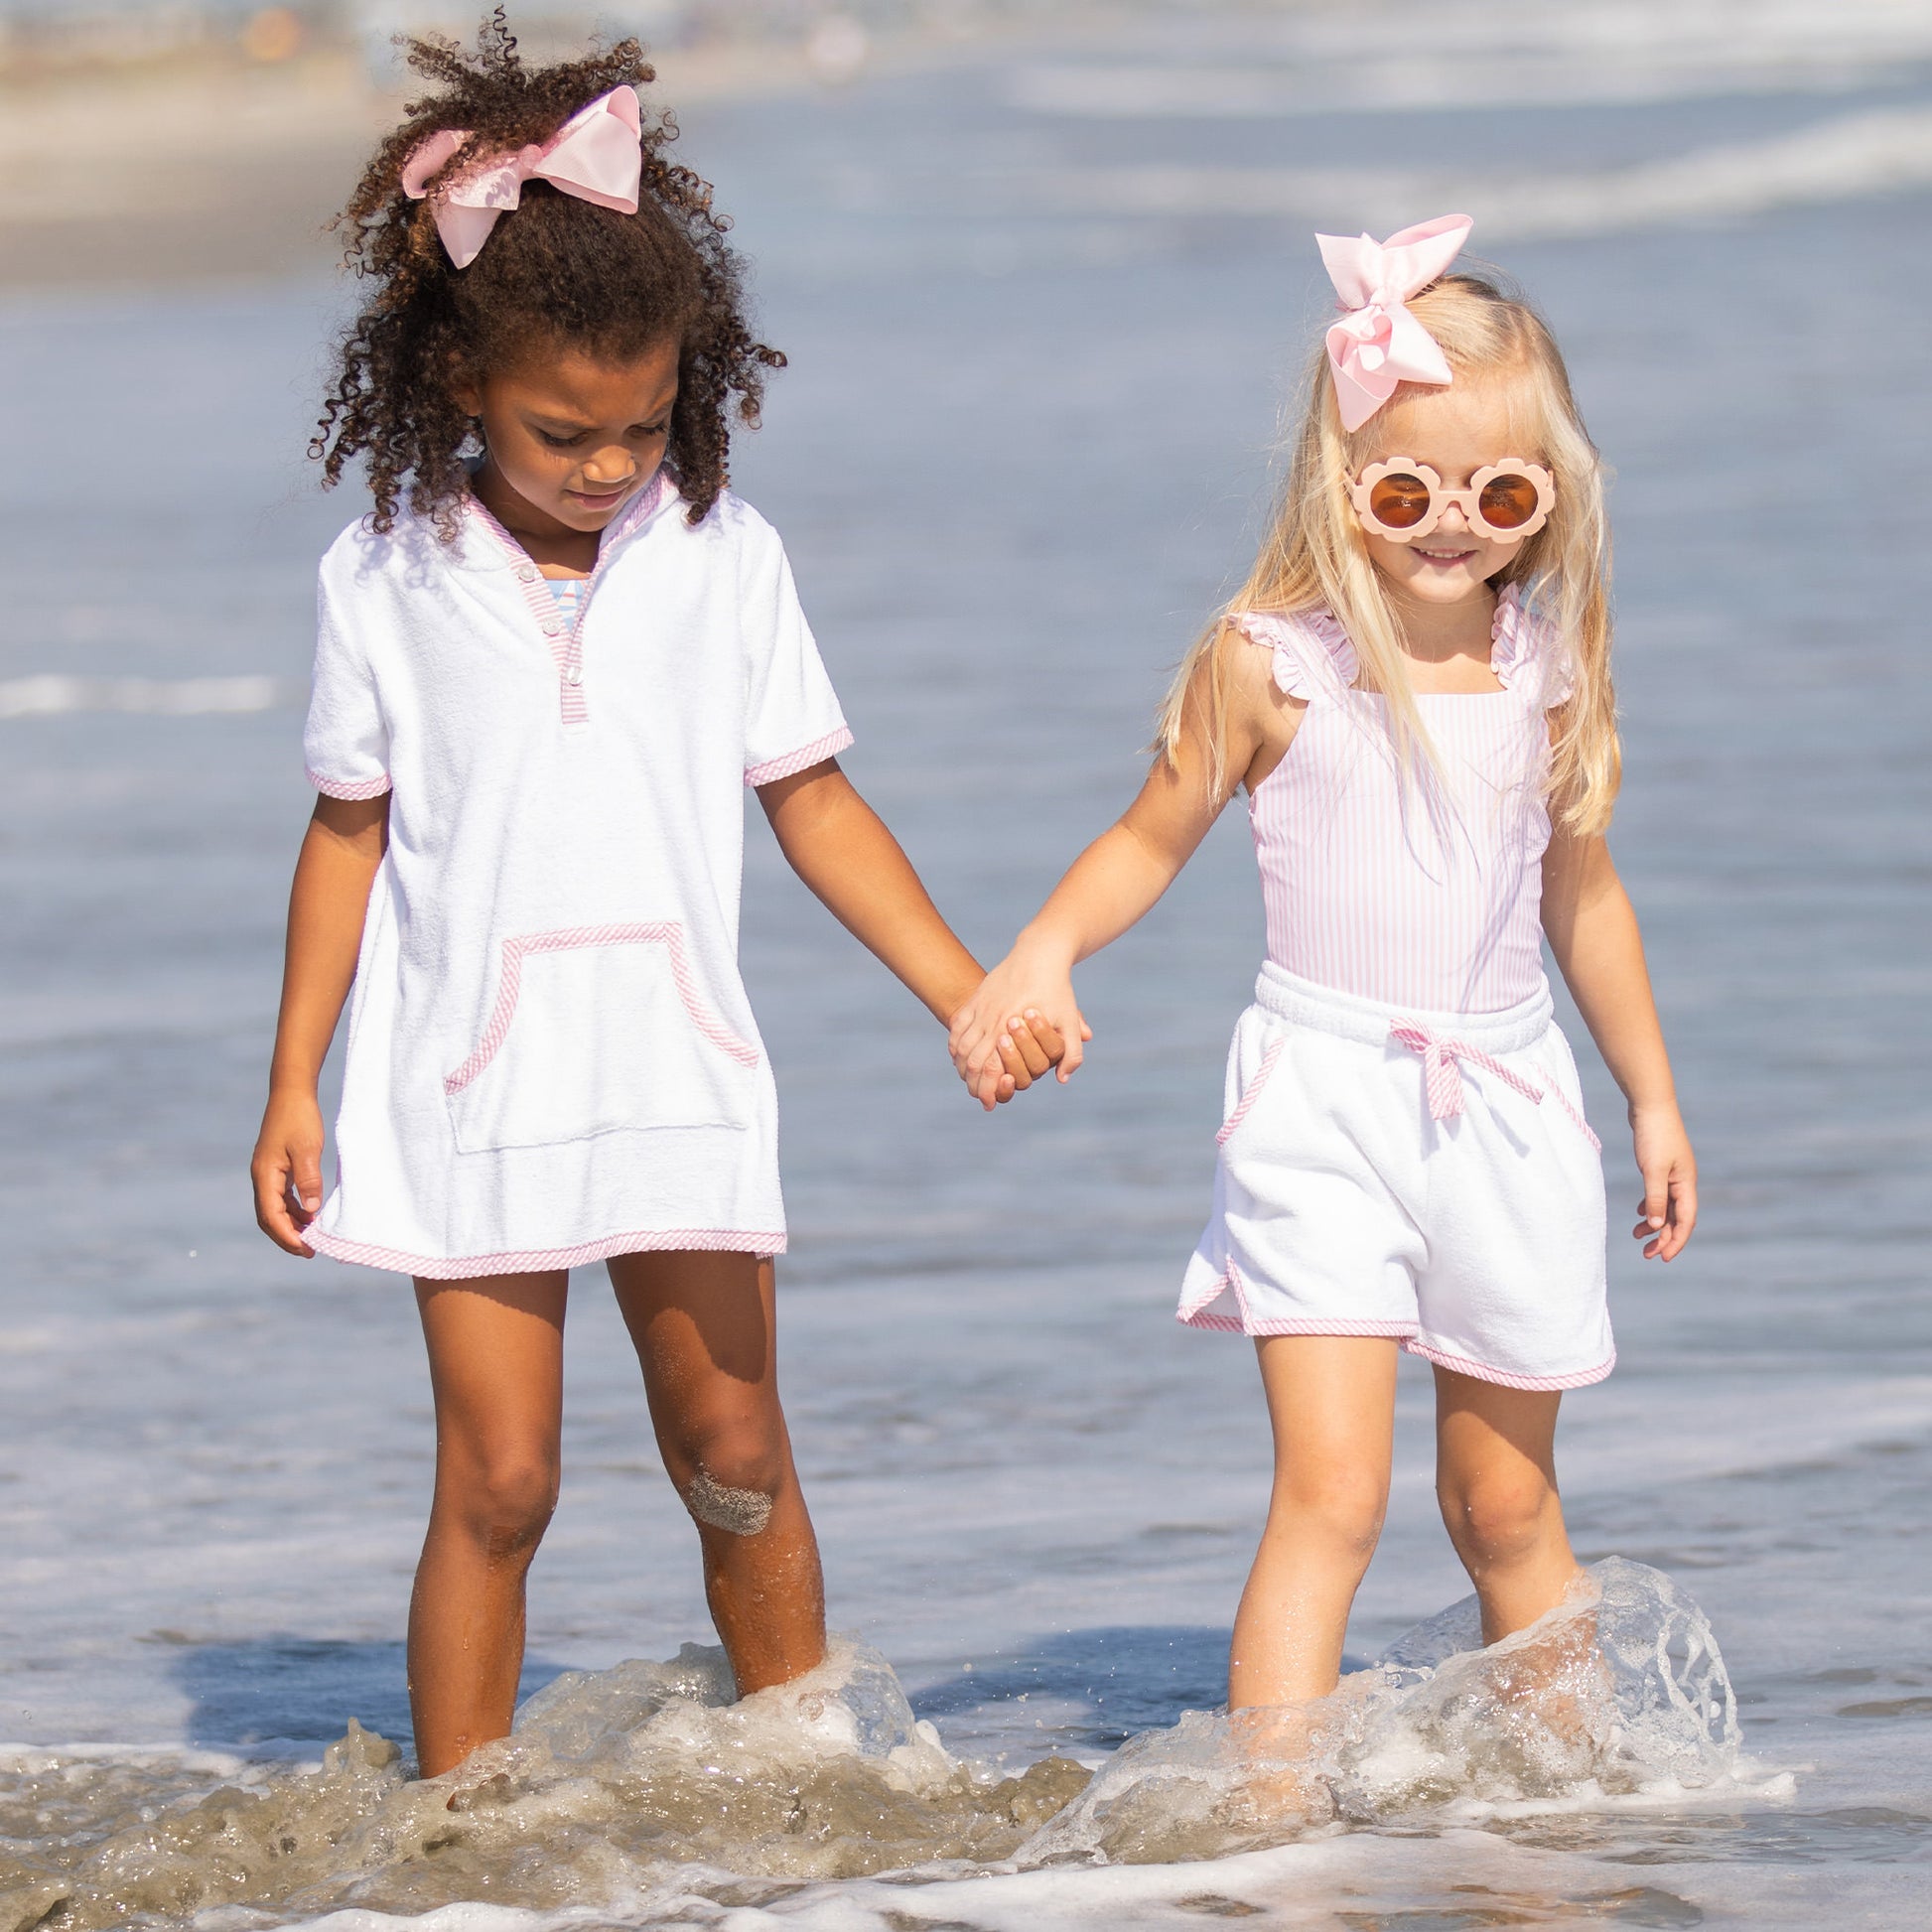 little girl wearing Brynn Beach Shorts holding hands with another little girl at the beach